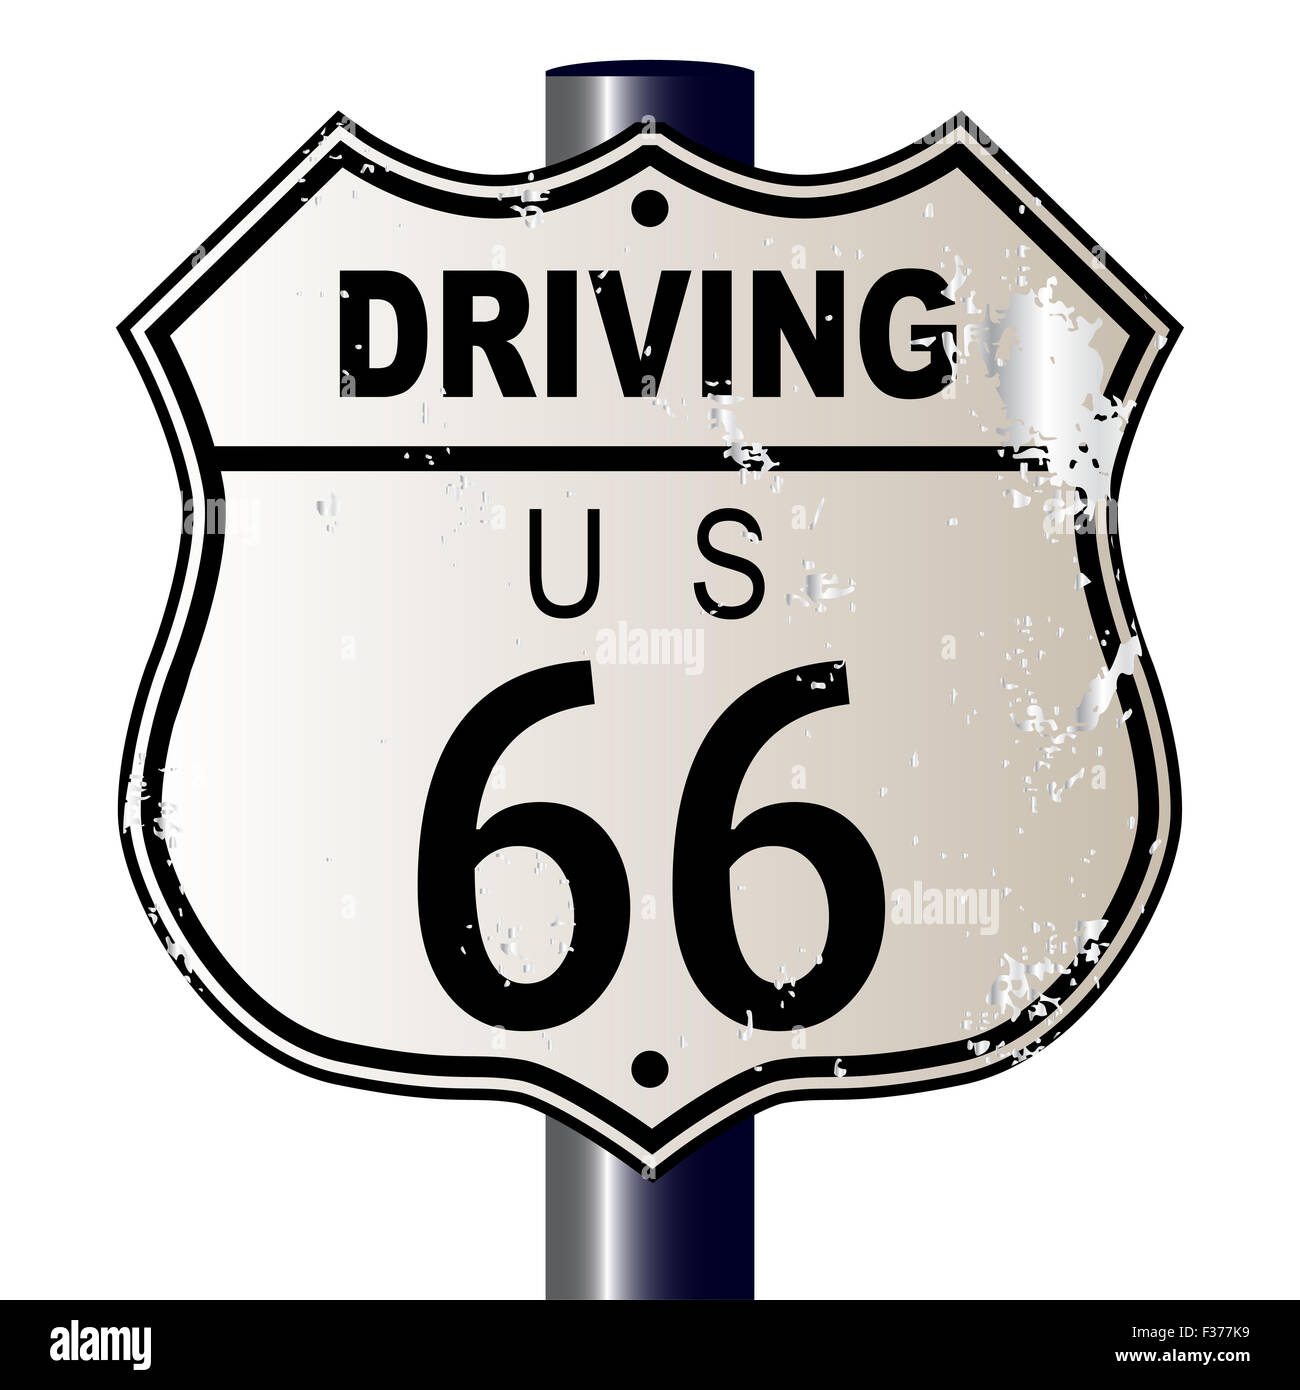 Driving Route 66 traffic sign over a white background and the legend DRIVING Stock Photo